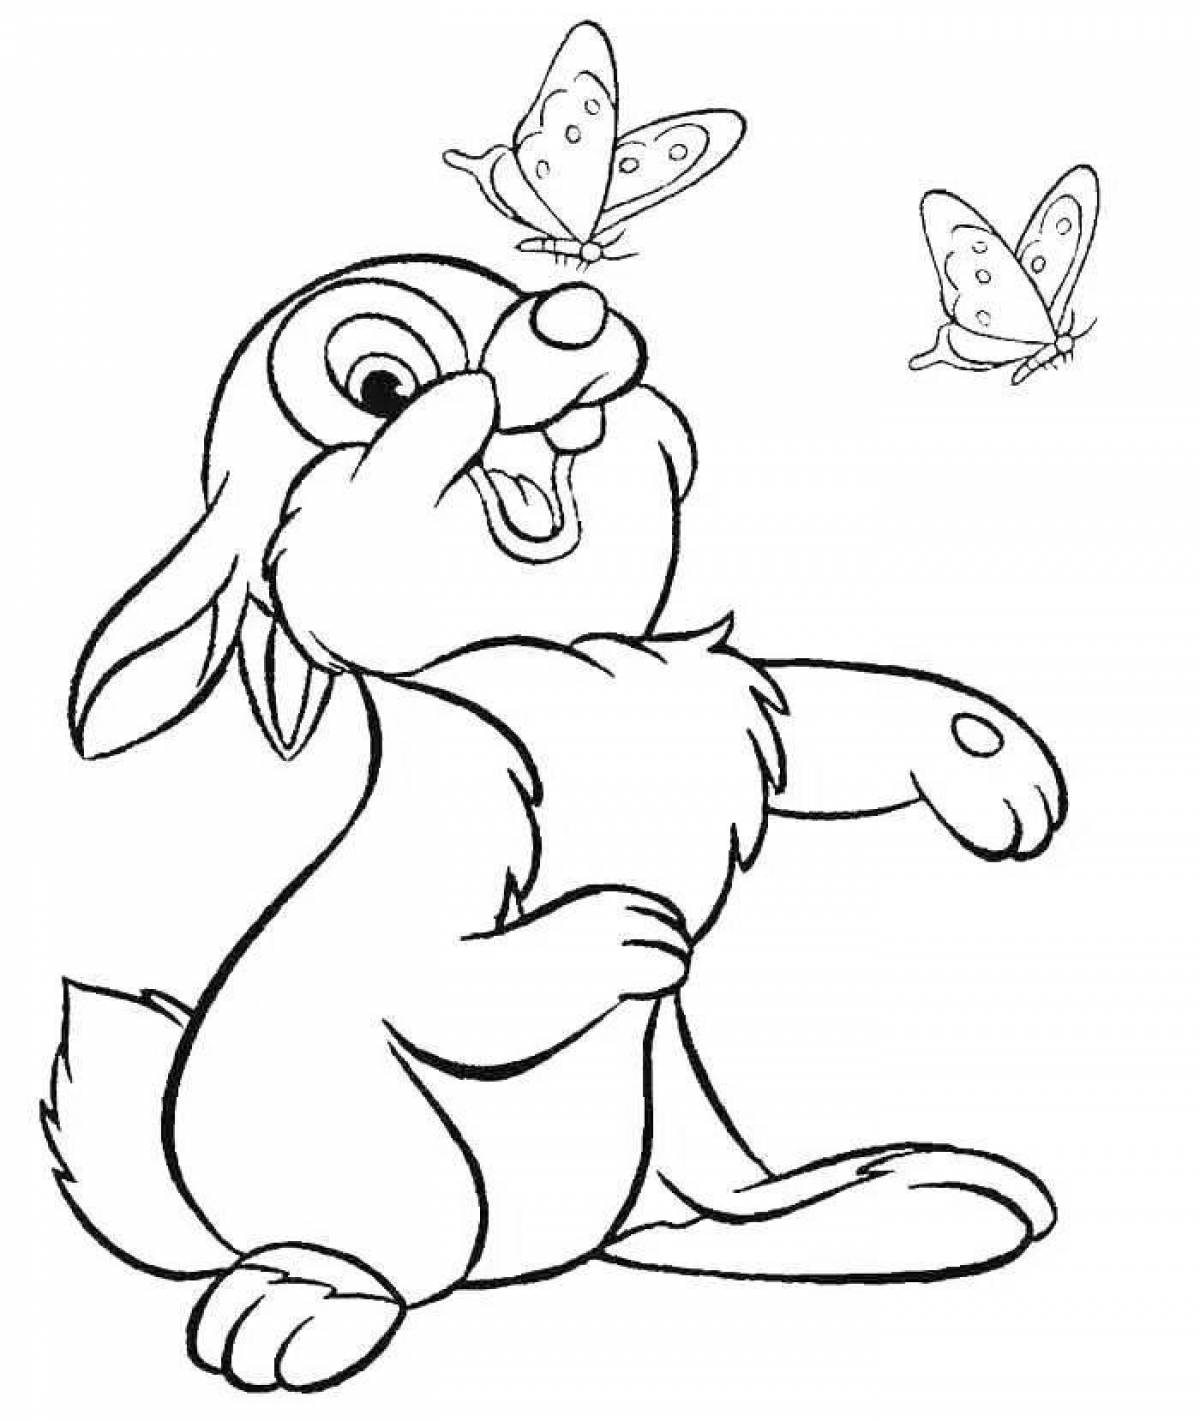 Colorful bunny coloring page